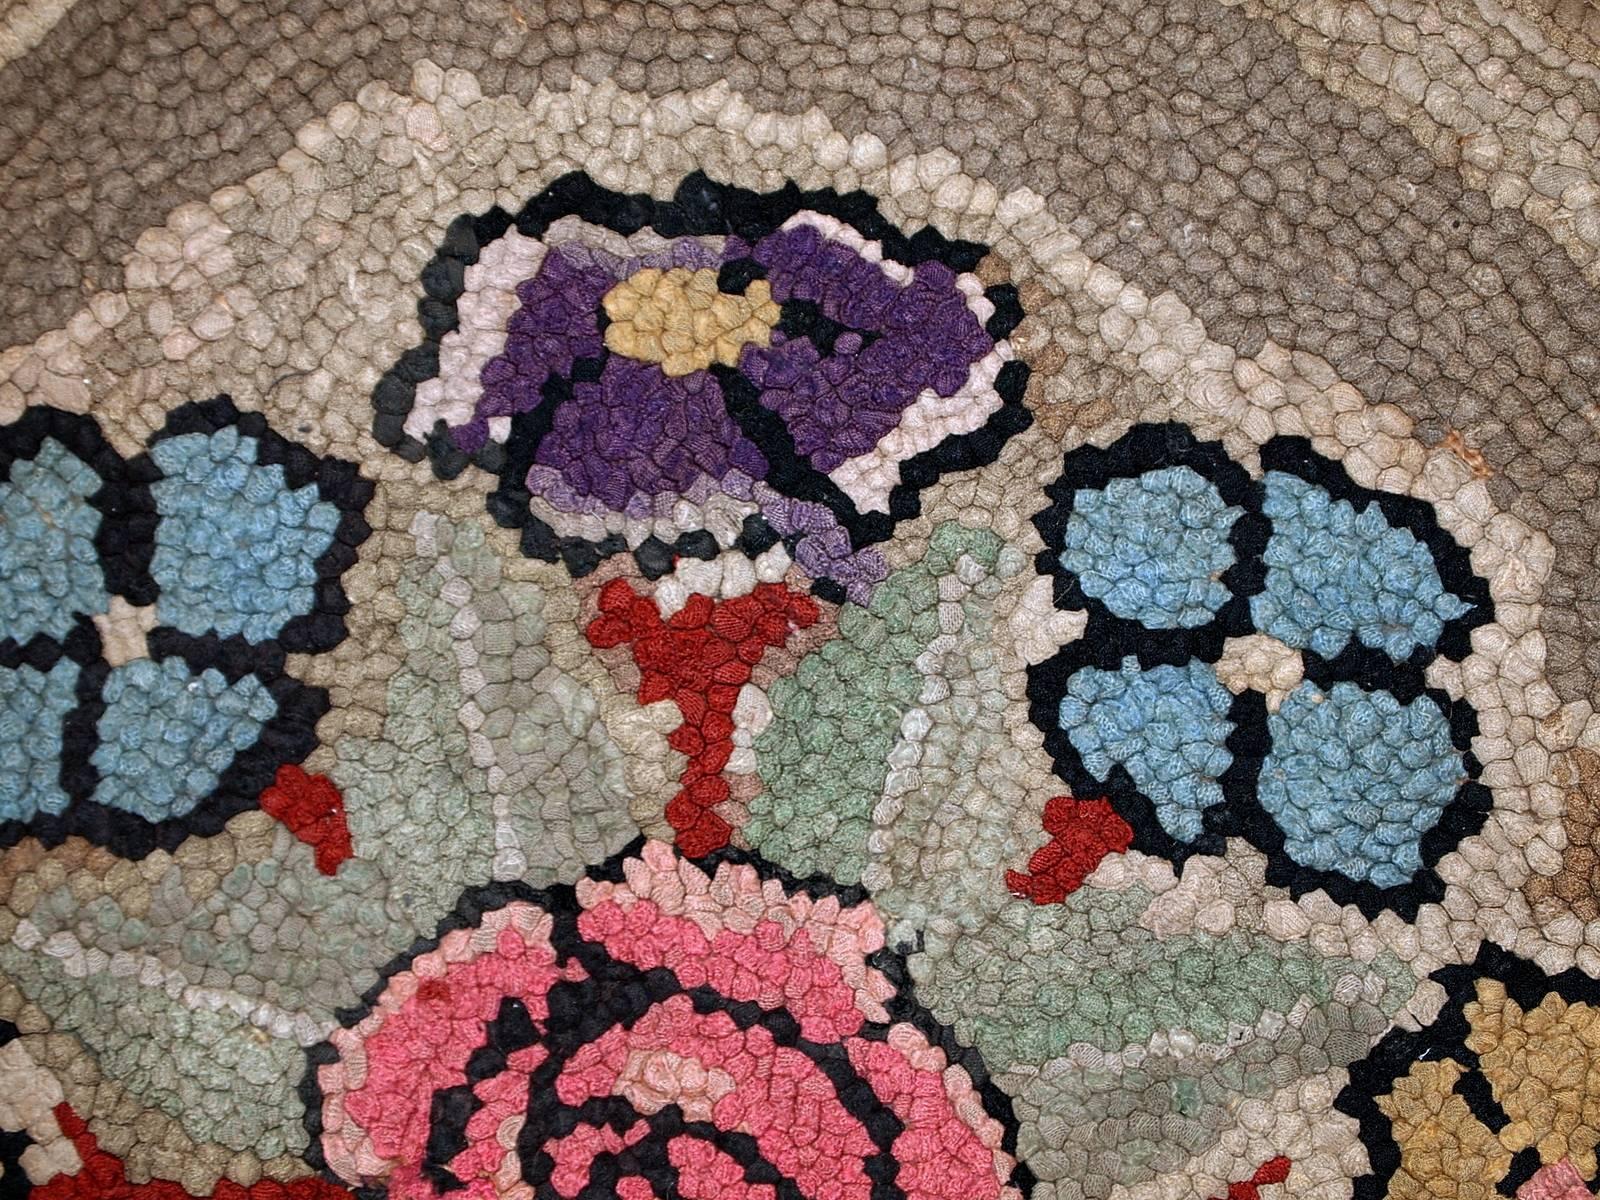 Handmade antique American hooked rug in good condition. The rug is in round shape. Beautiful colorful floral medallion surrounded by a multiply borders of different shades from grey to brown. The rug is from the beginning of 20th century and in